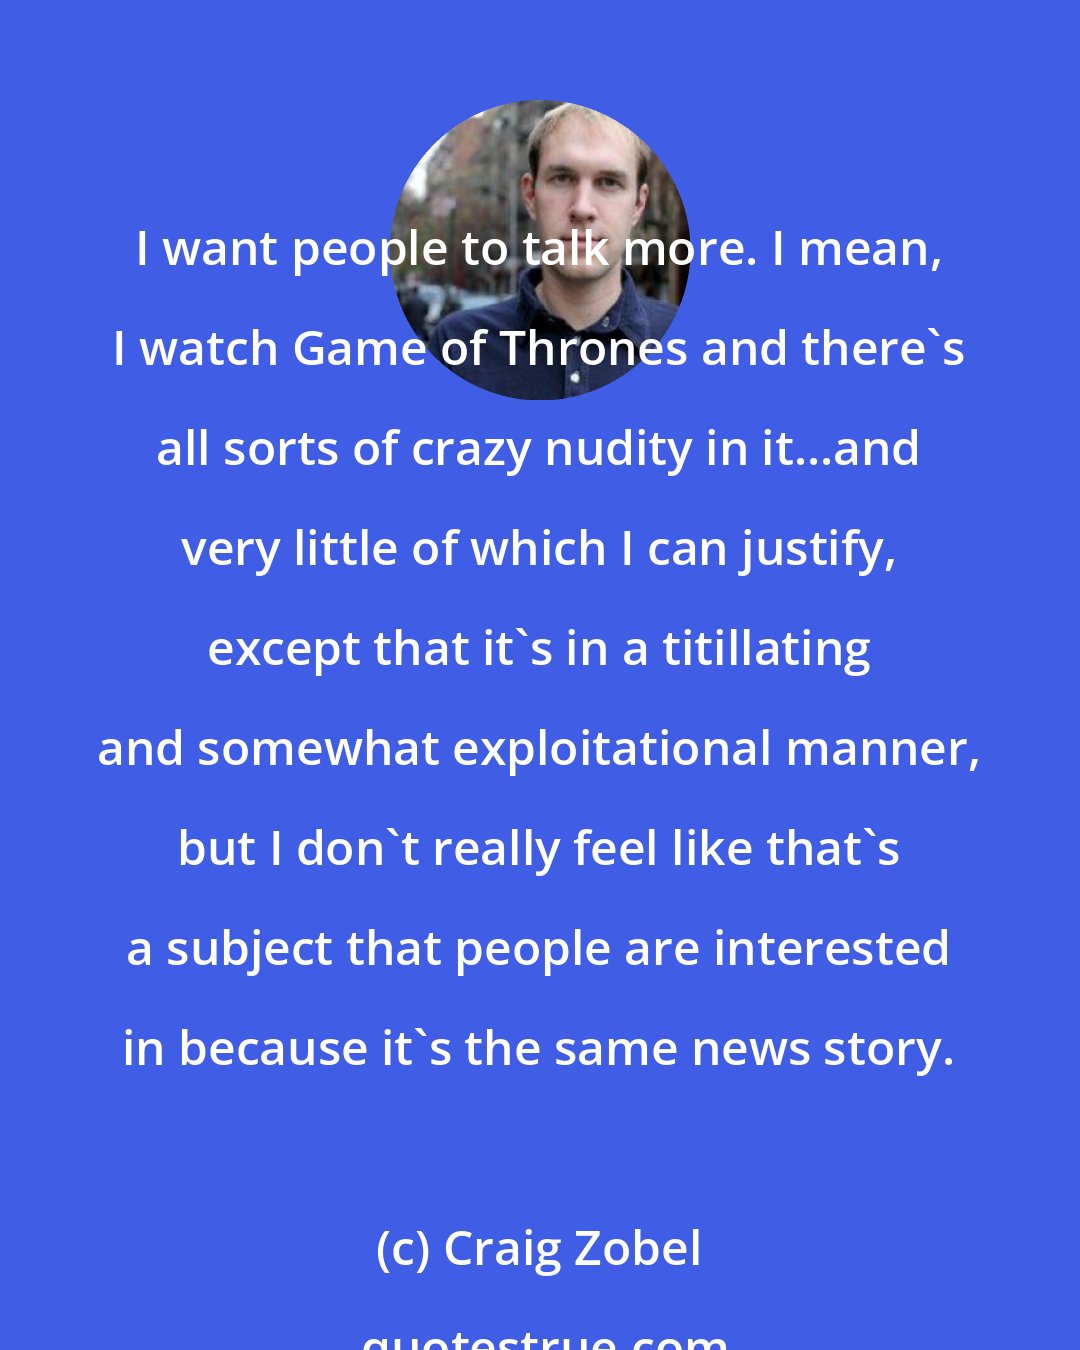 Craig Zobel: I want people to talk more. I mean, I watch Game of Thrones and there's all sorts of crazy nudity in it...and very little of which I can justify, except that it's in a titillating and somewhat exploitational manner, but I don't really feel like that's a subject that people are interested in because it's the same news story.